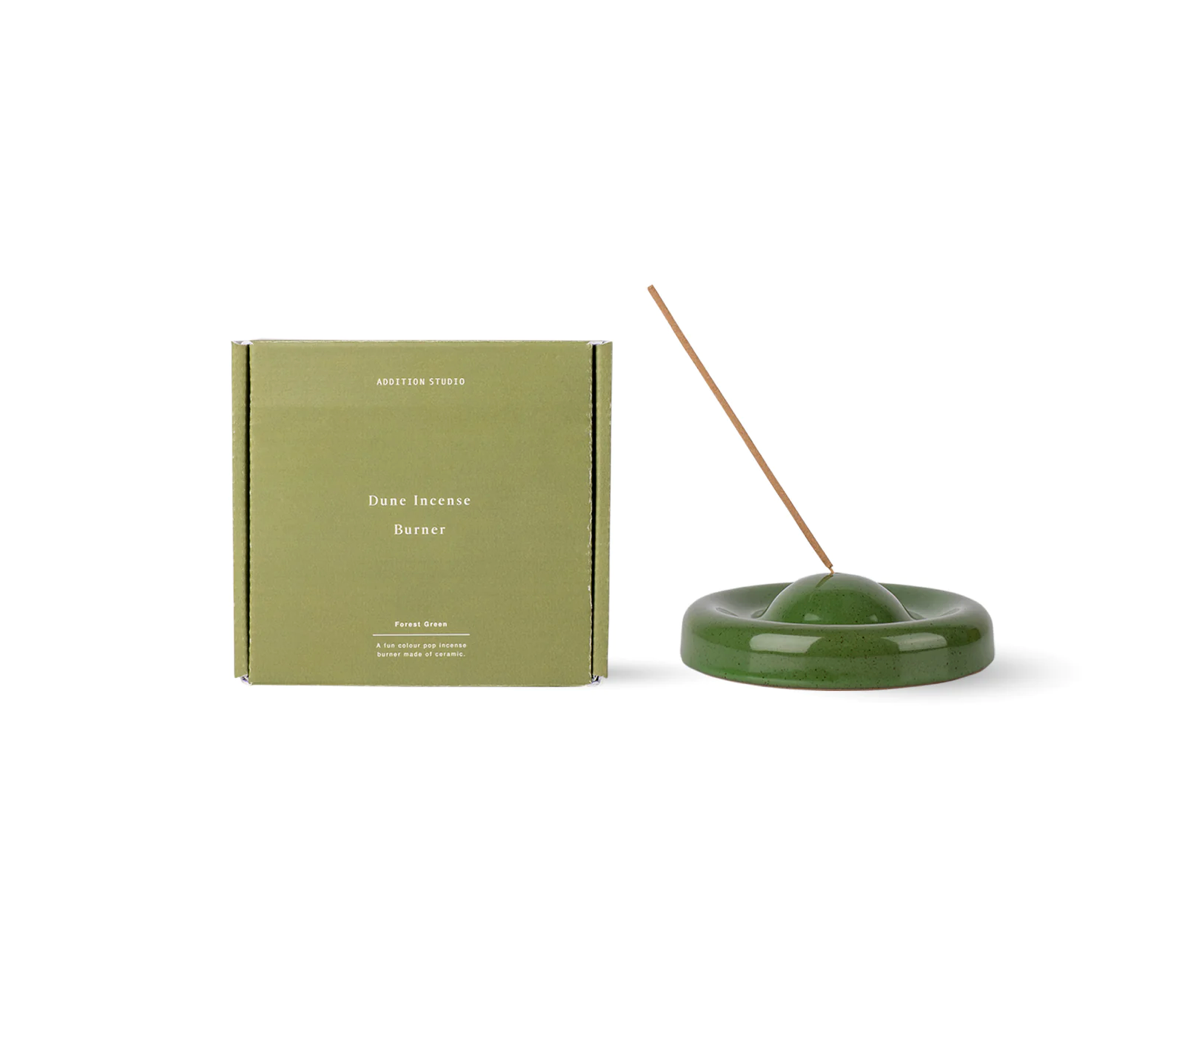 Dune Ceramic Incense Holder Forest Green Incense and Burners by Addition Studio - Prae Wellness